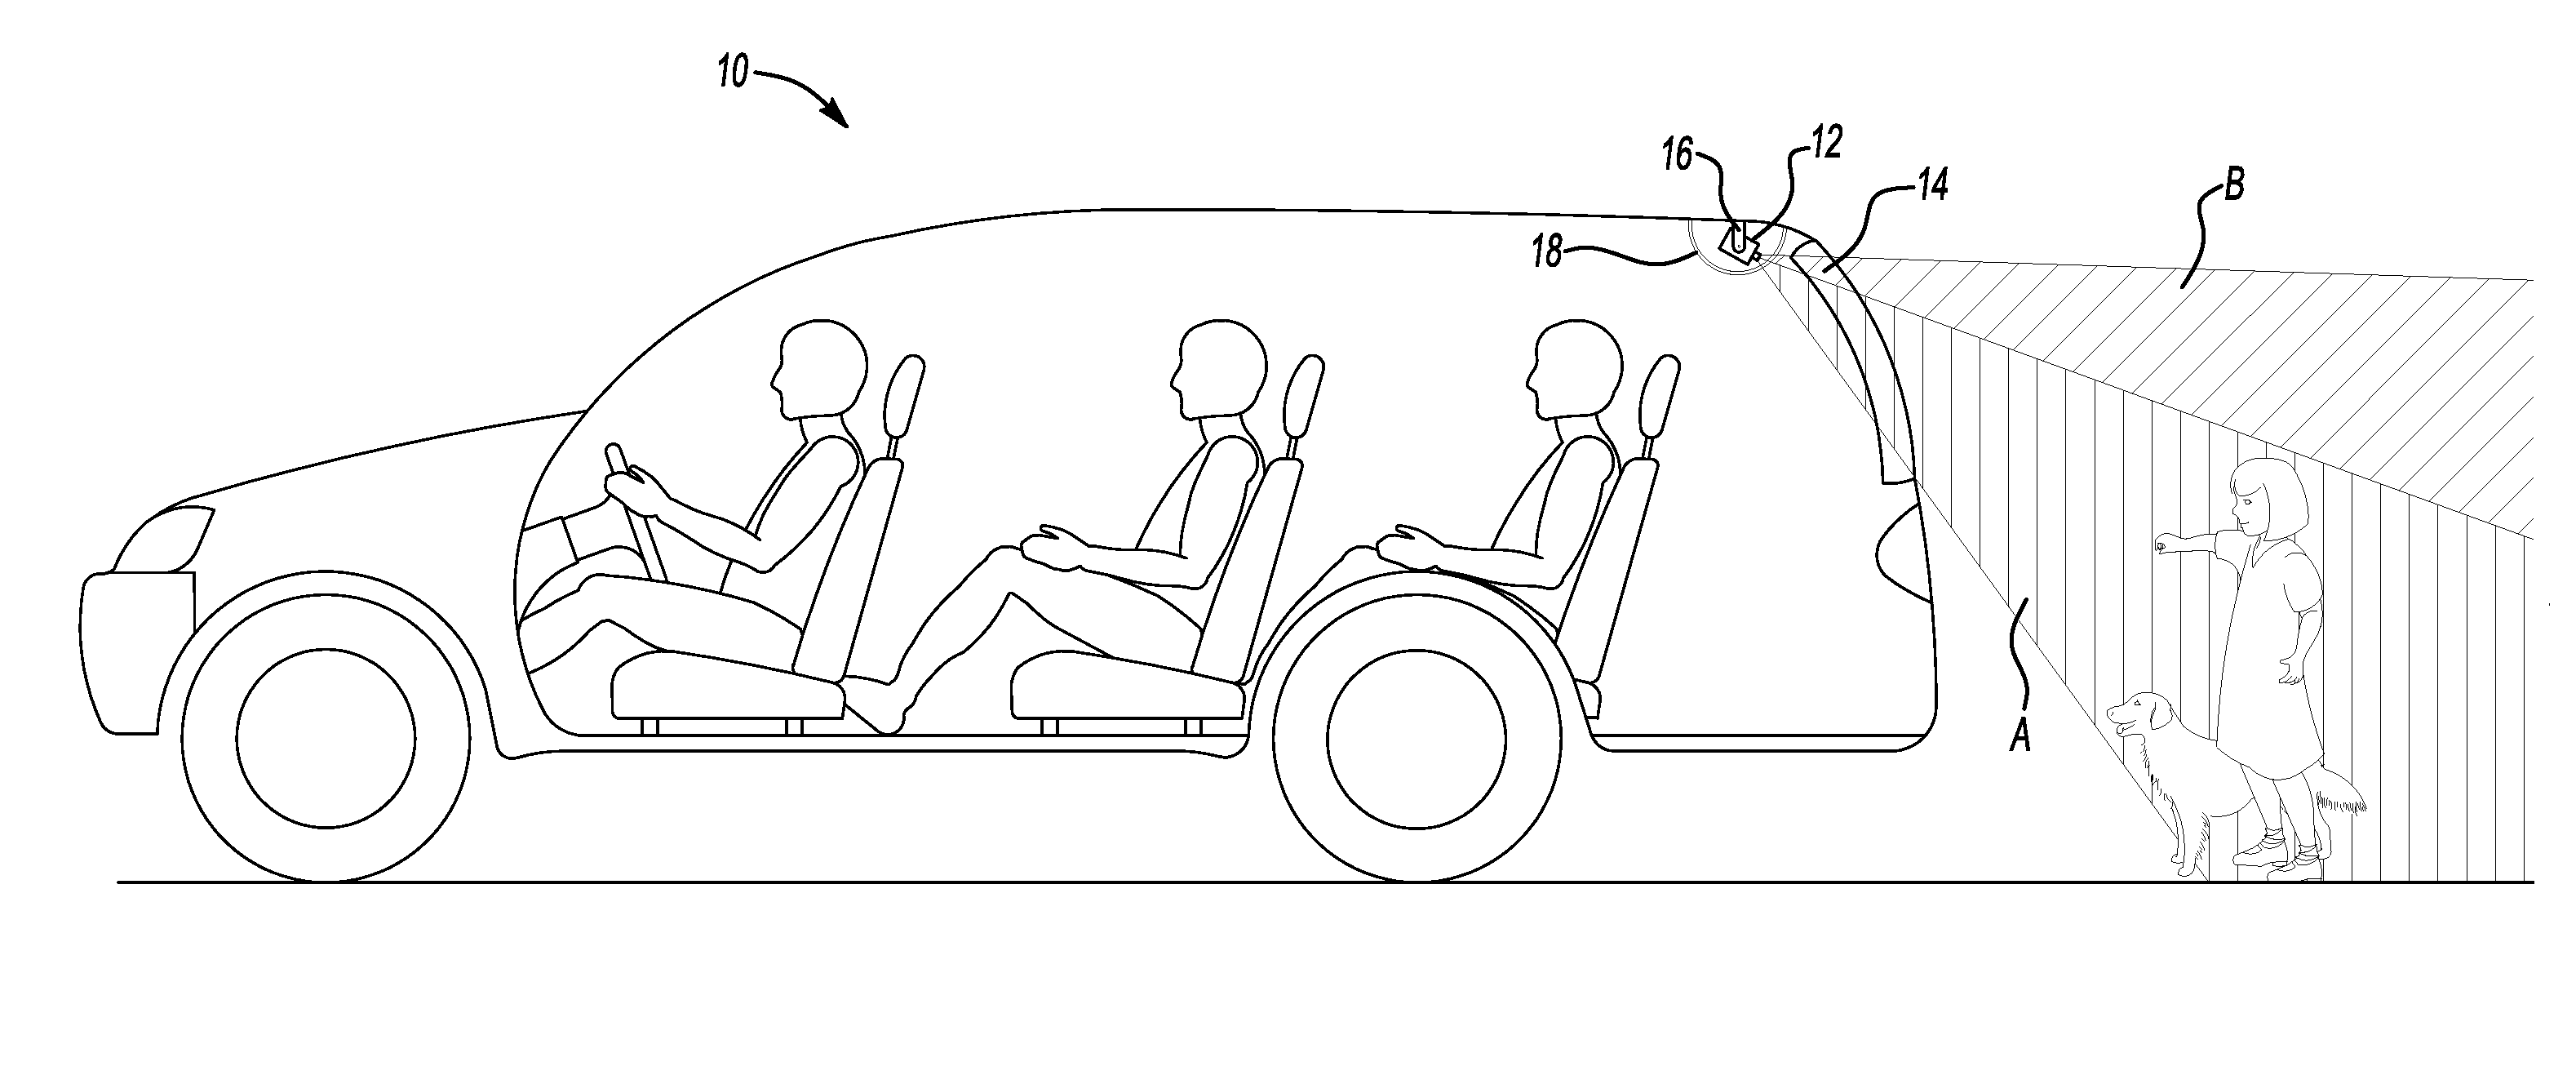 Dual-mode vehicle rear vision system